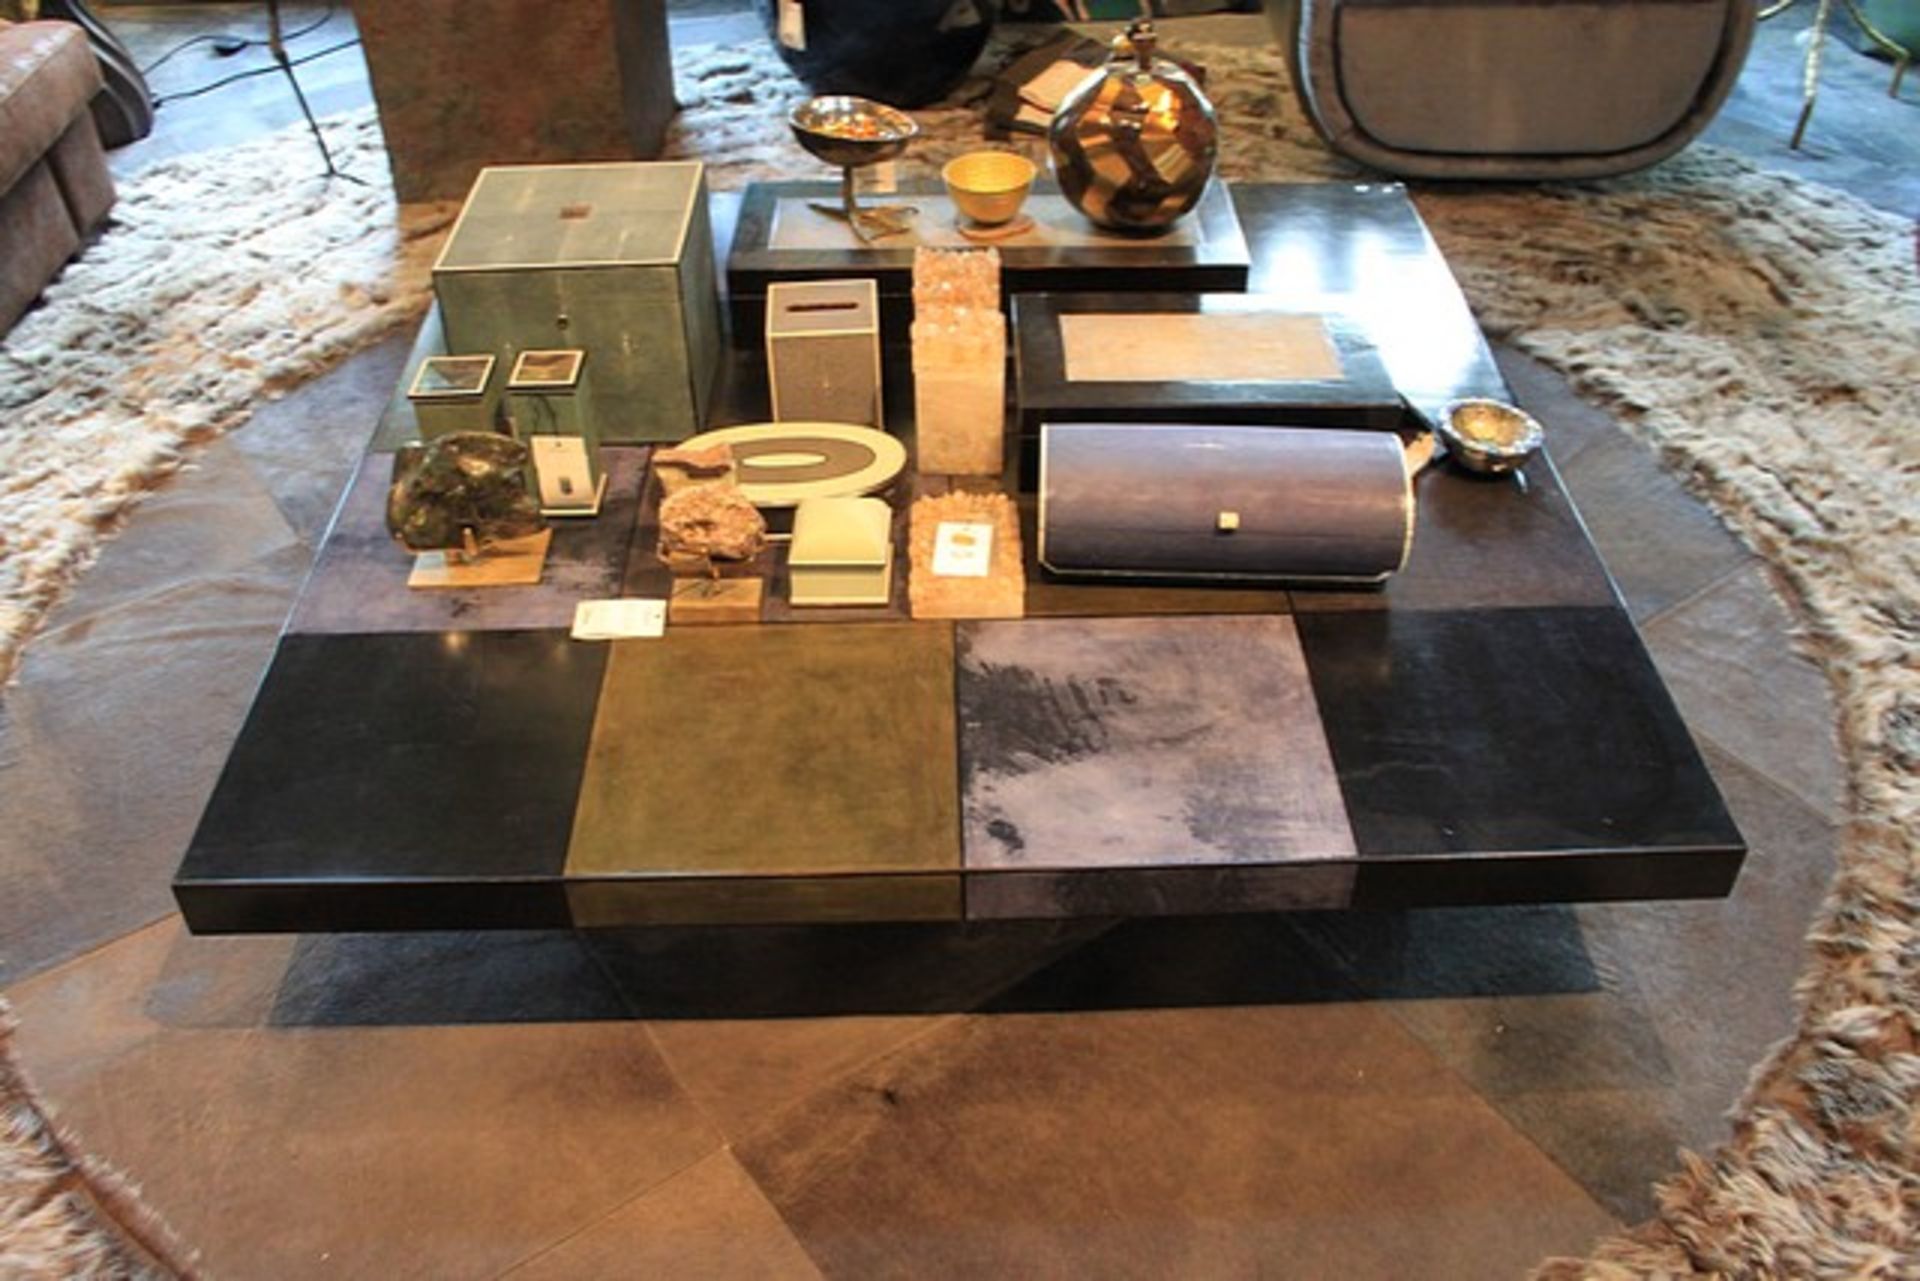 Coffee table pairing an amalgamation of the finest materials with an eye catching sculptural form,